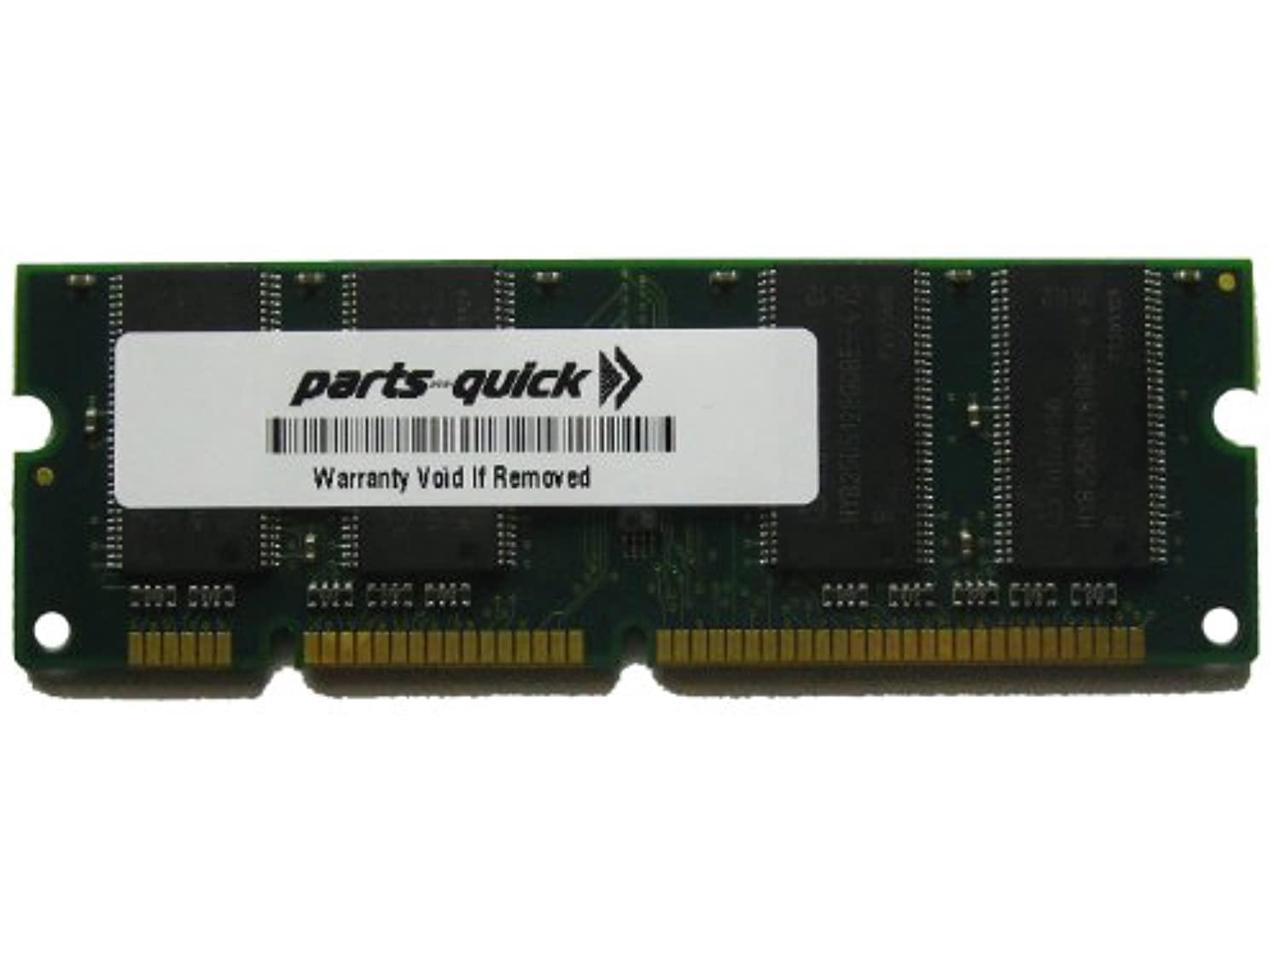 parts-quick 1GB Printer Memory for Xerox Phaser 6180 Series 6180N 6180MFP/N 6180MFP,DN Brand 6180DN 